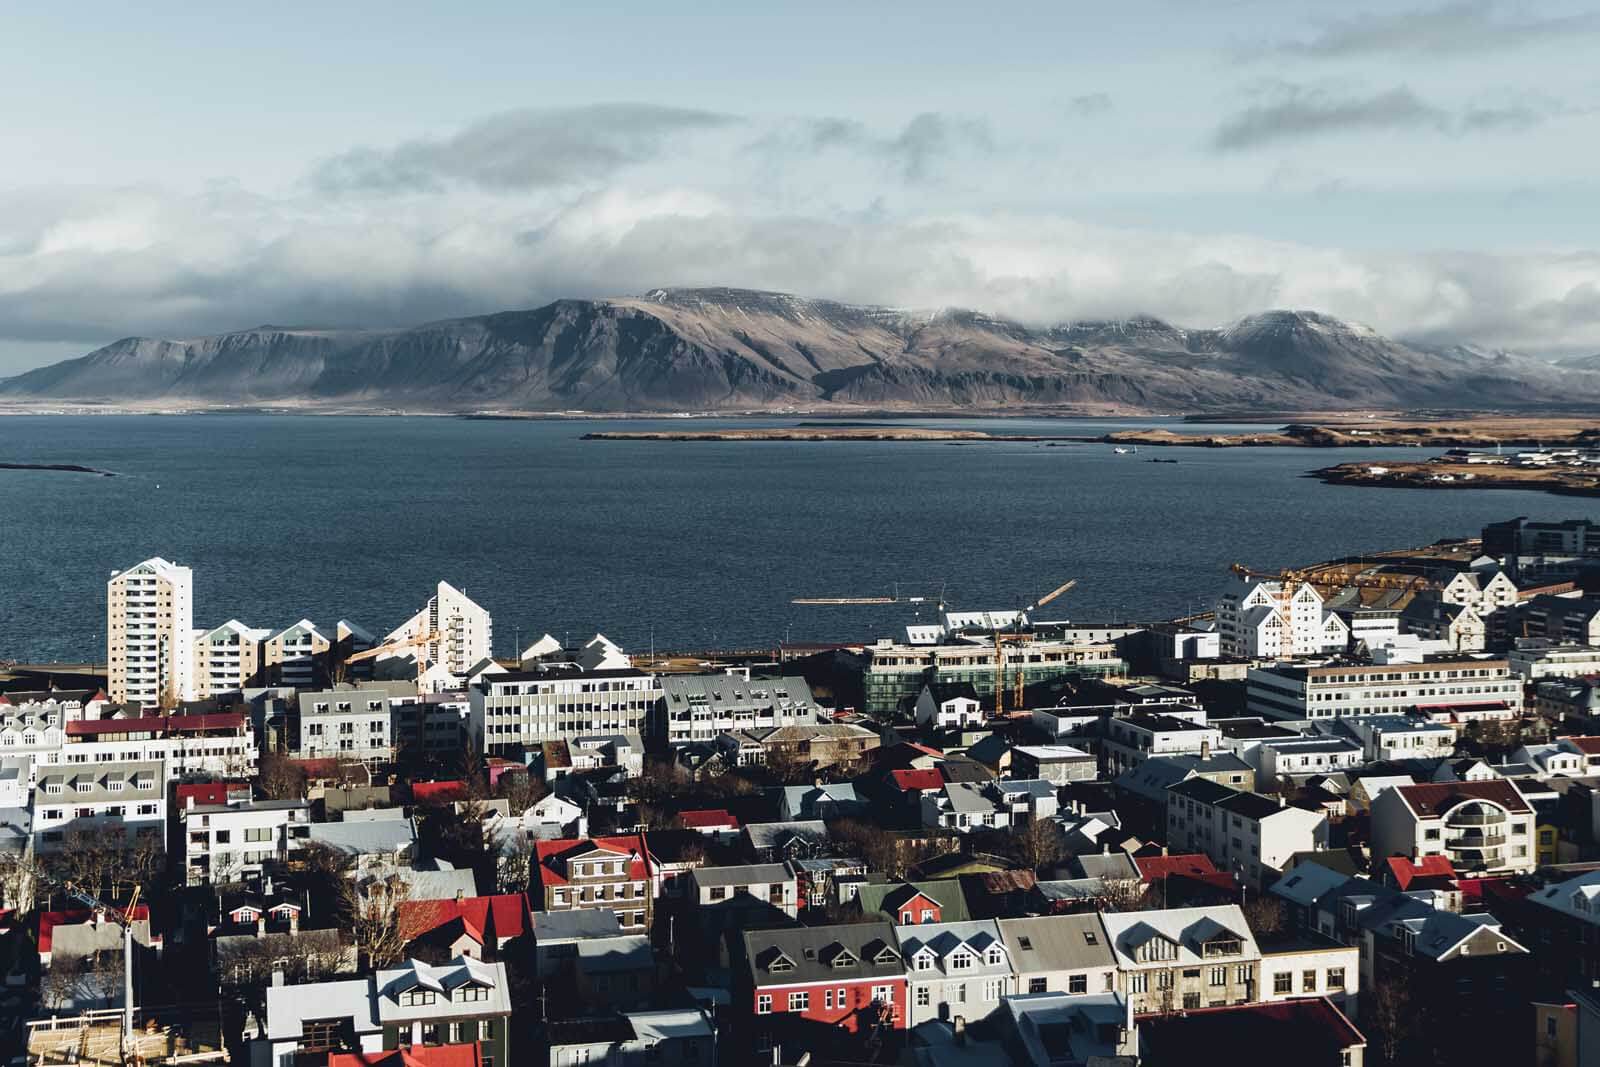 View of Reykjavik from above